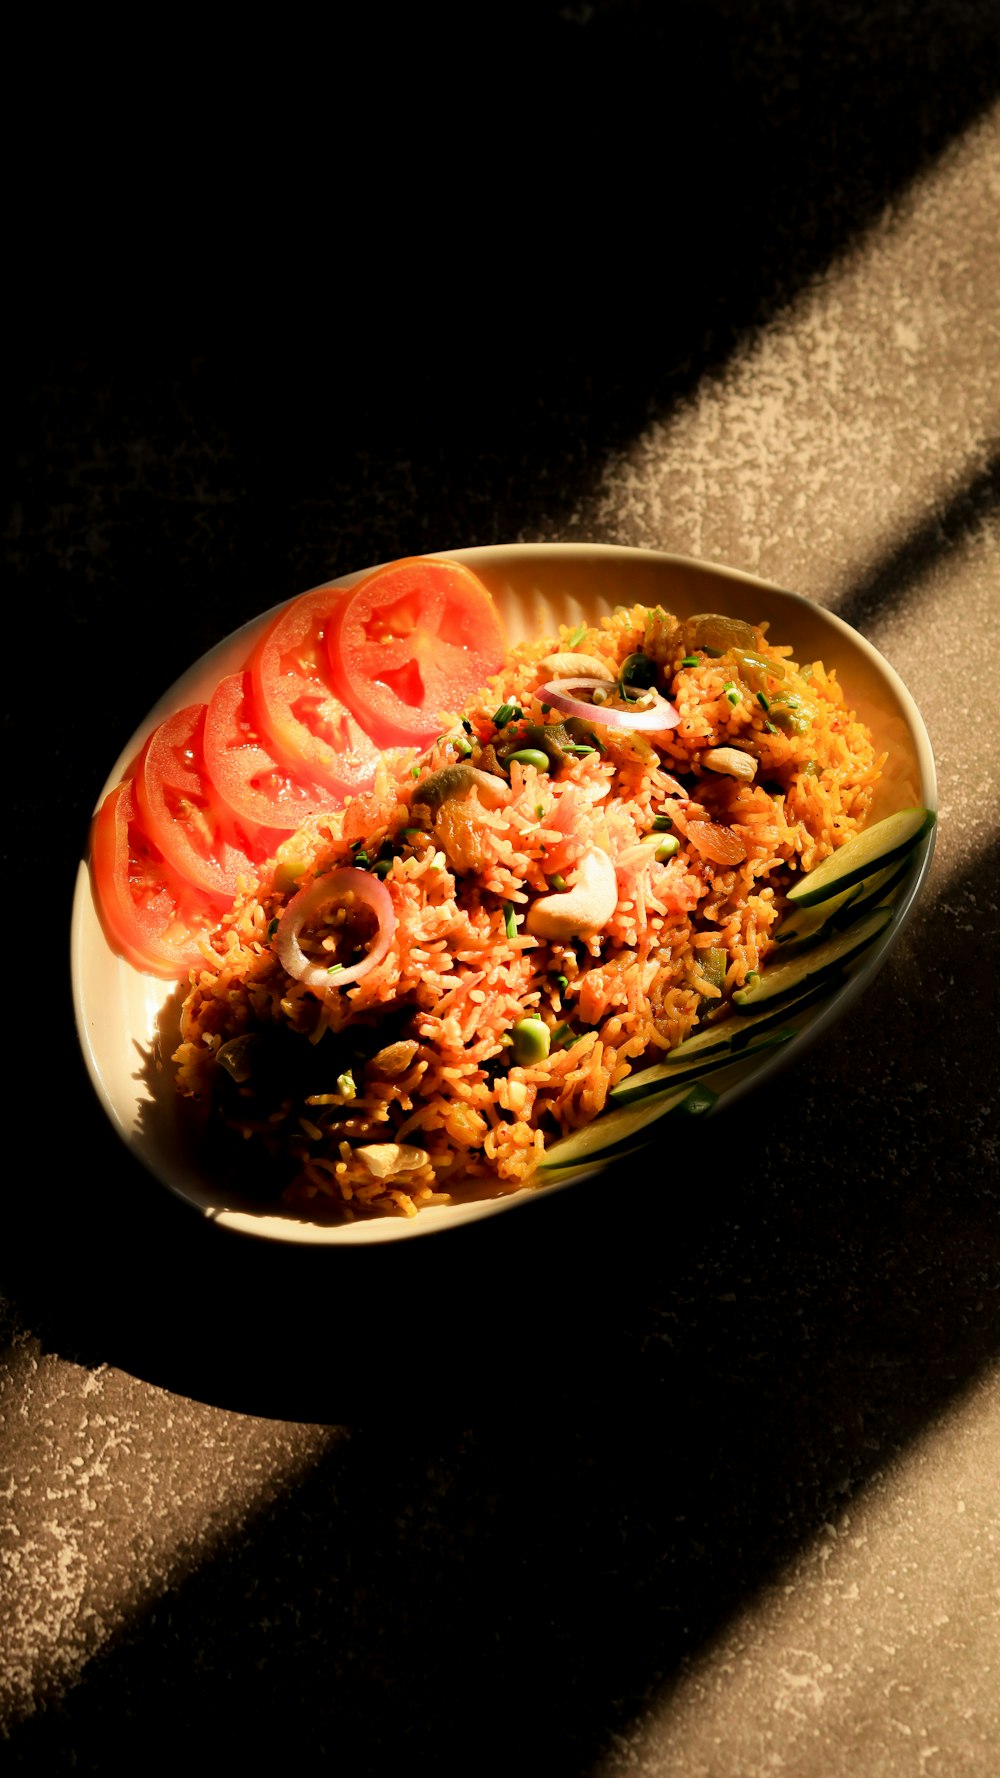 a plate of food with tomatoes and rice